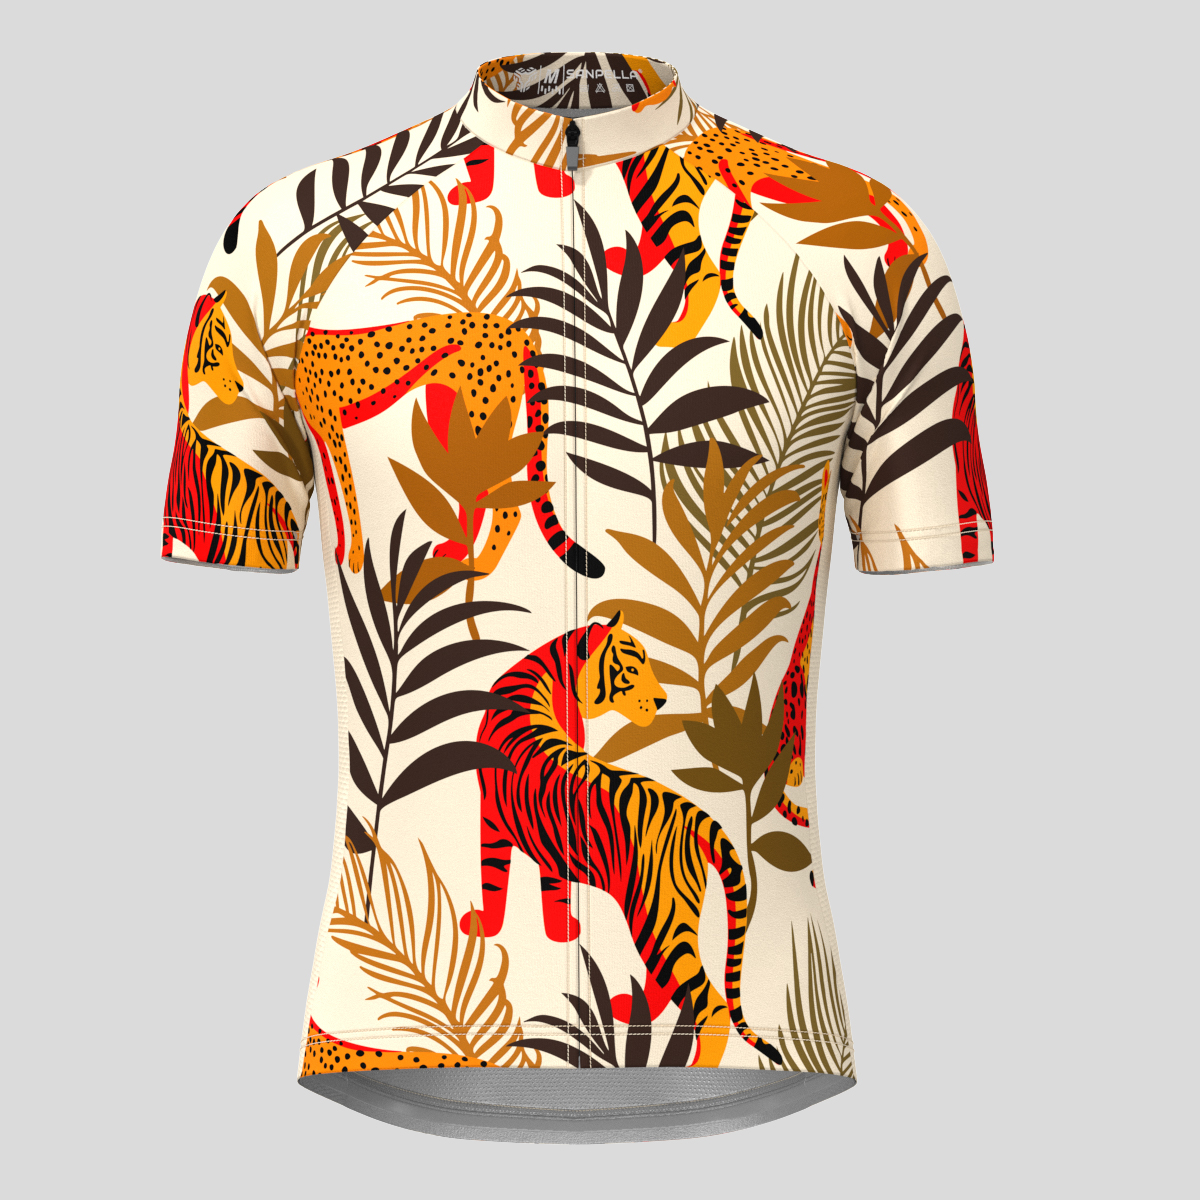 Leopard Tiger Abstract Nature jungle Men's Cycling Jersey